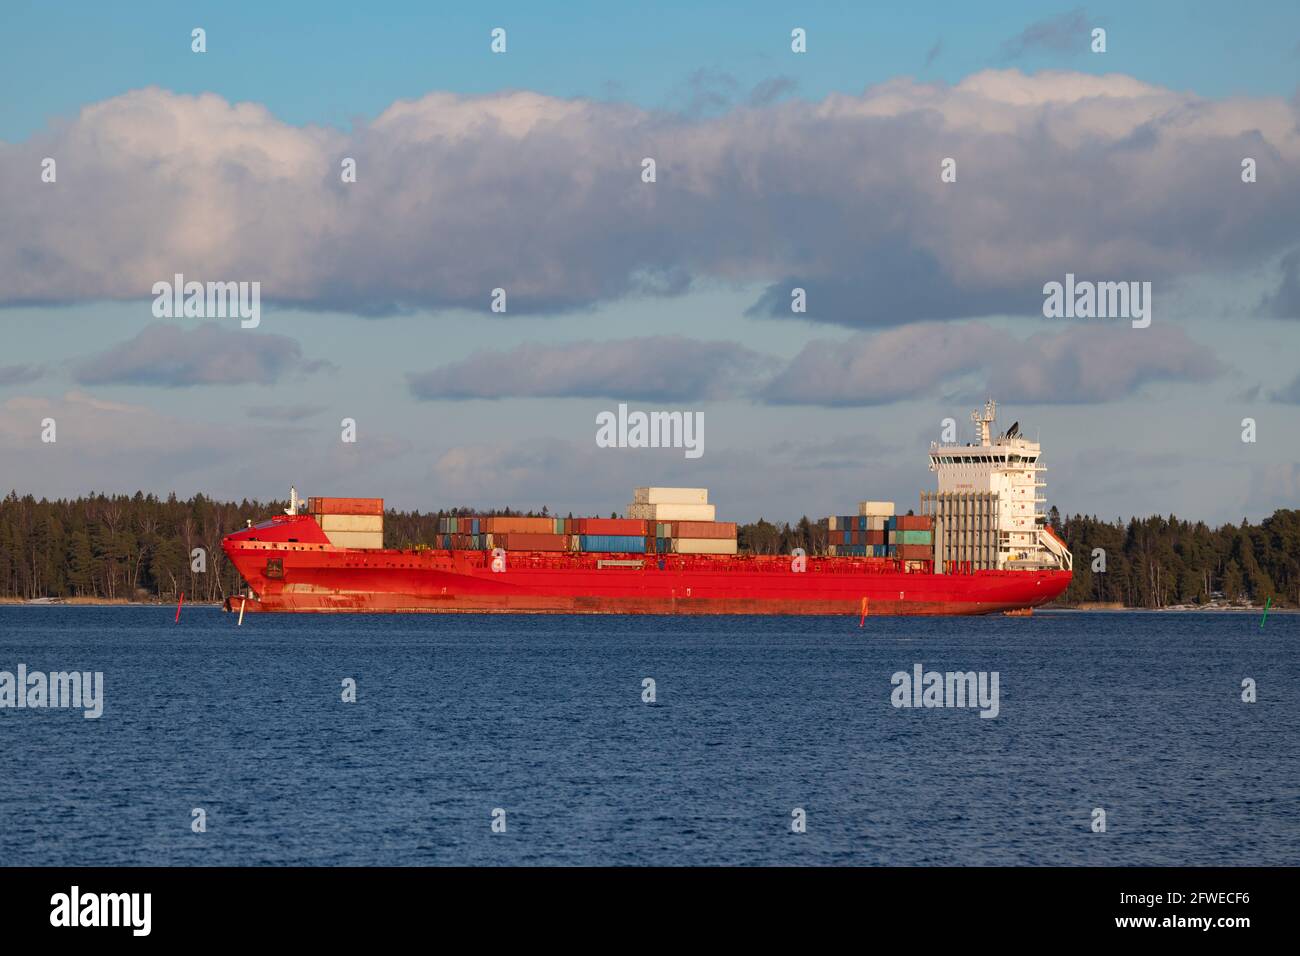 Red partly laden container ship arriving in Vuosaari Harbour in Helsinki, Finland through an archipelago. Stock Photo